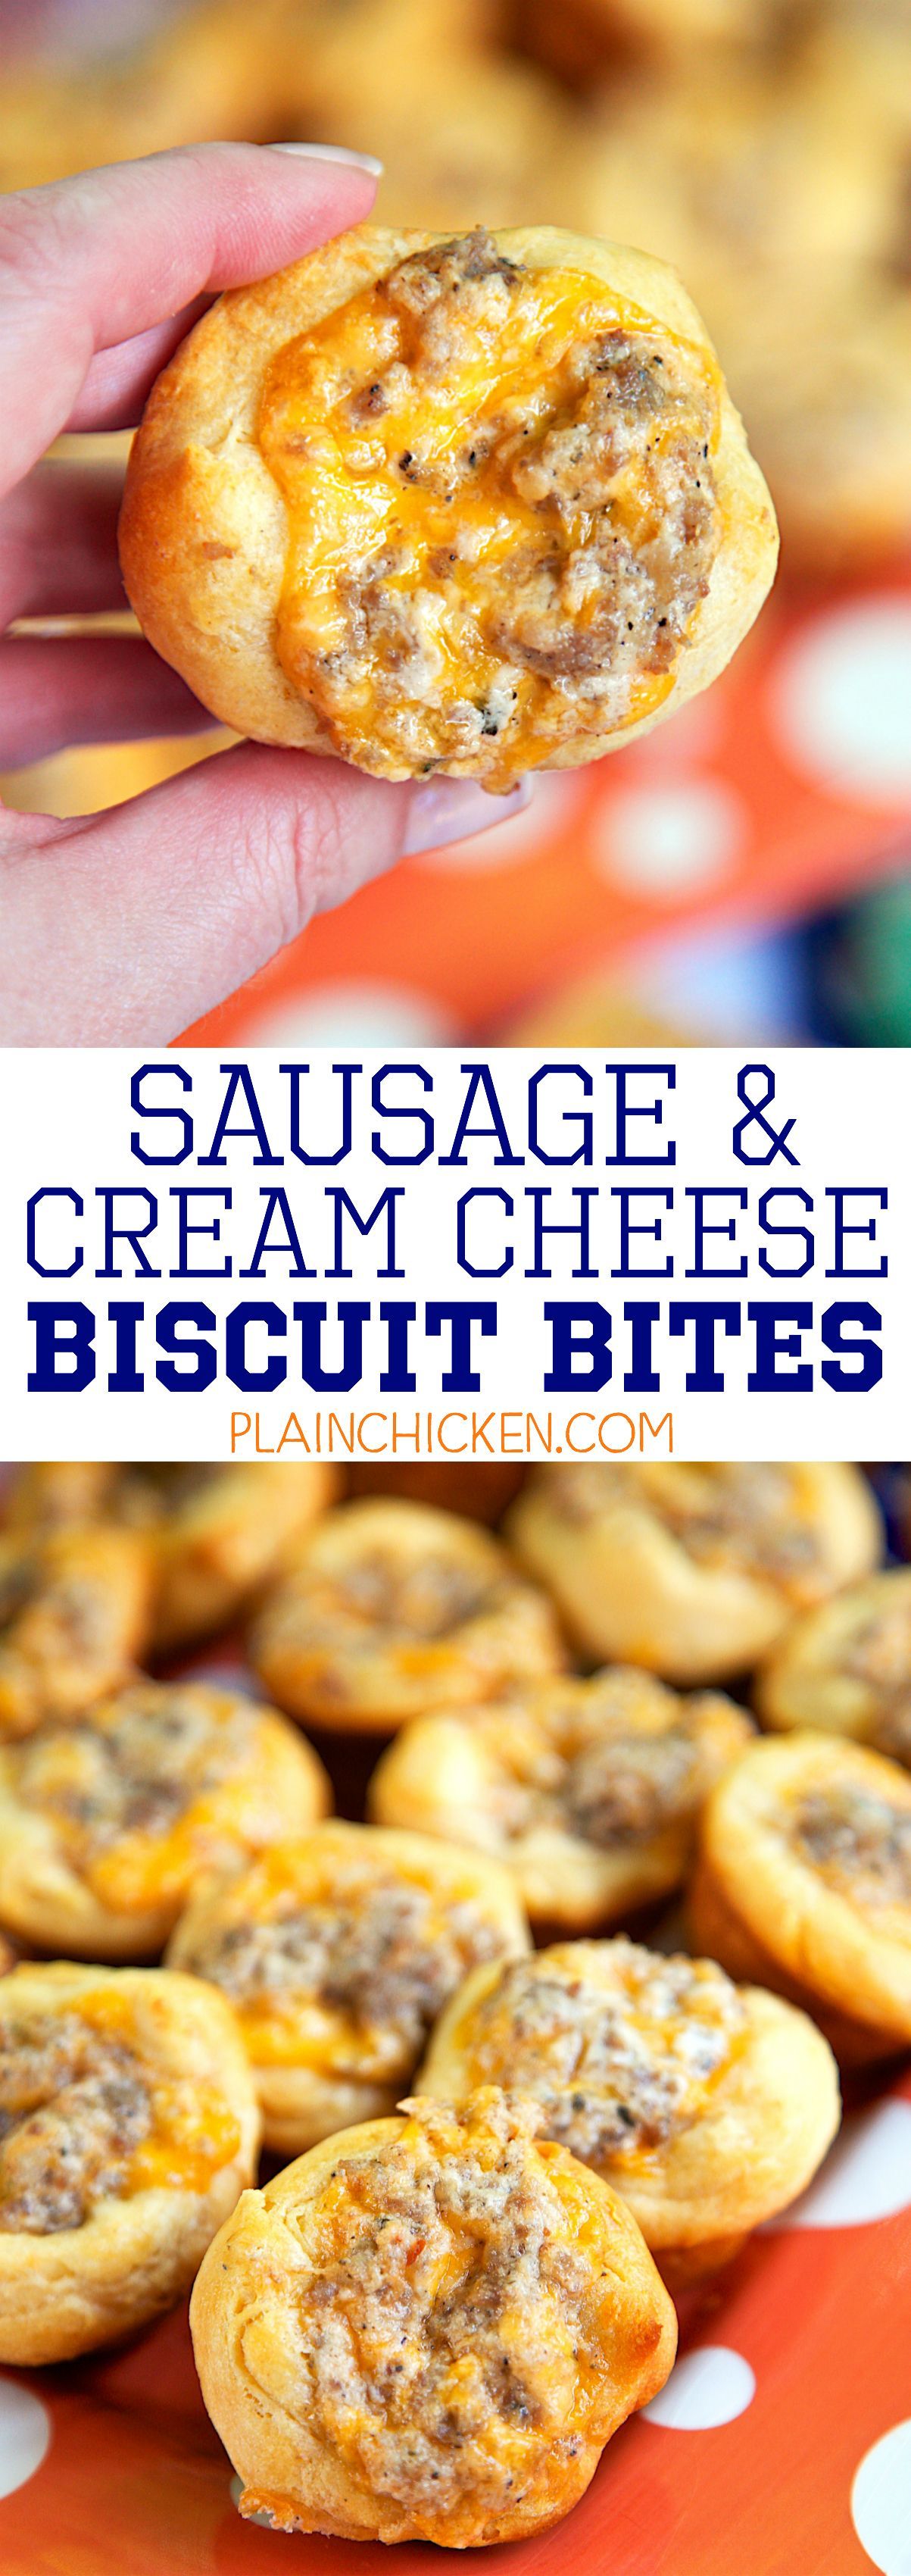 Sausage and Cream Cheese Biscuit Bites - so GOOD! I'm totally addicted to these things! Sausage, cream cheese, Worcestershire, cheddar cheese baked in biscuits. Can make the sausage mixture ahead of time and refrigerate until ready to bake. Great for tailgating, breakfast and parties! Everyone loves this recipe! -   23 breakfast sausage recipes
 ideas